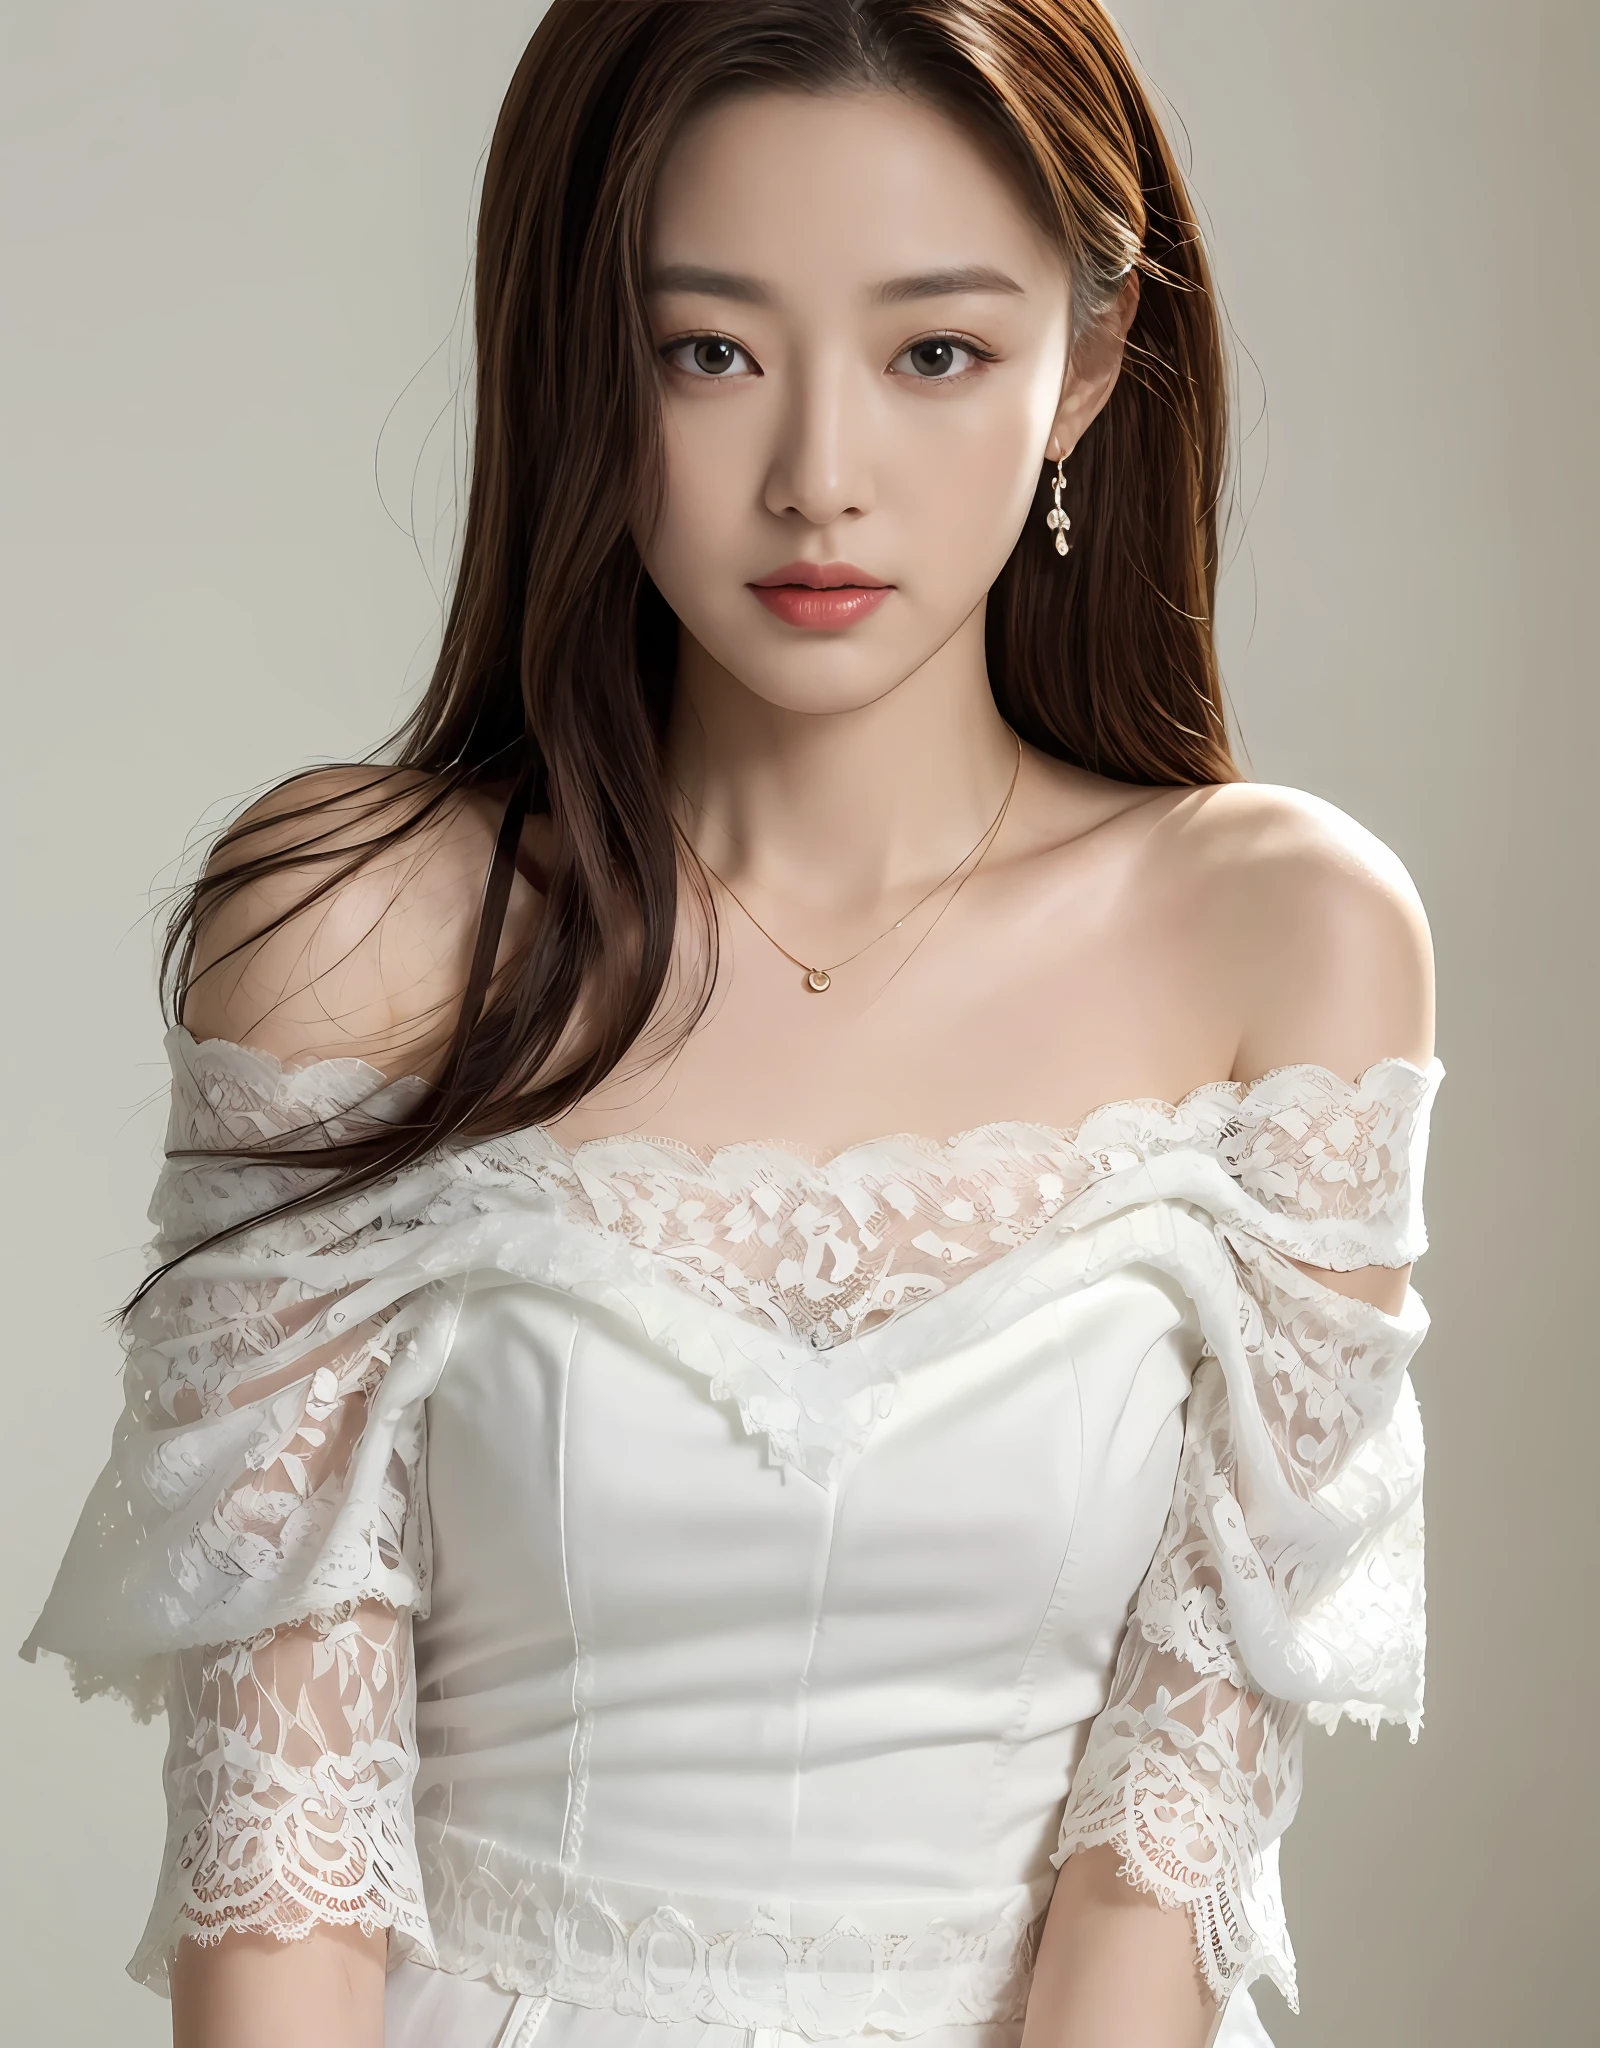 8K, Masterpiece, Best quality, Realistic,Attractive female necklace with lace necklace, Off-the-shoulder white shirt, Against a neutral background